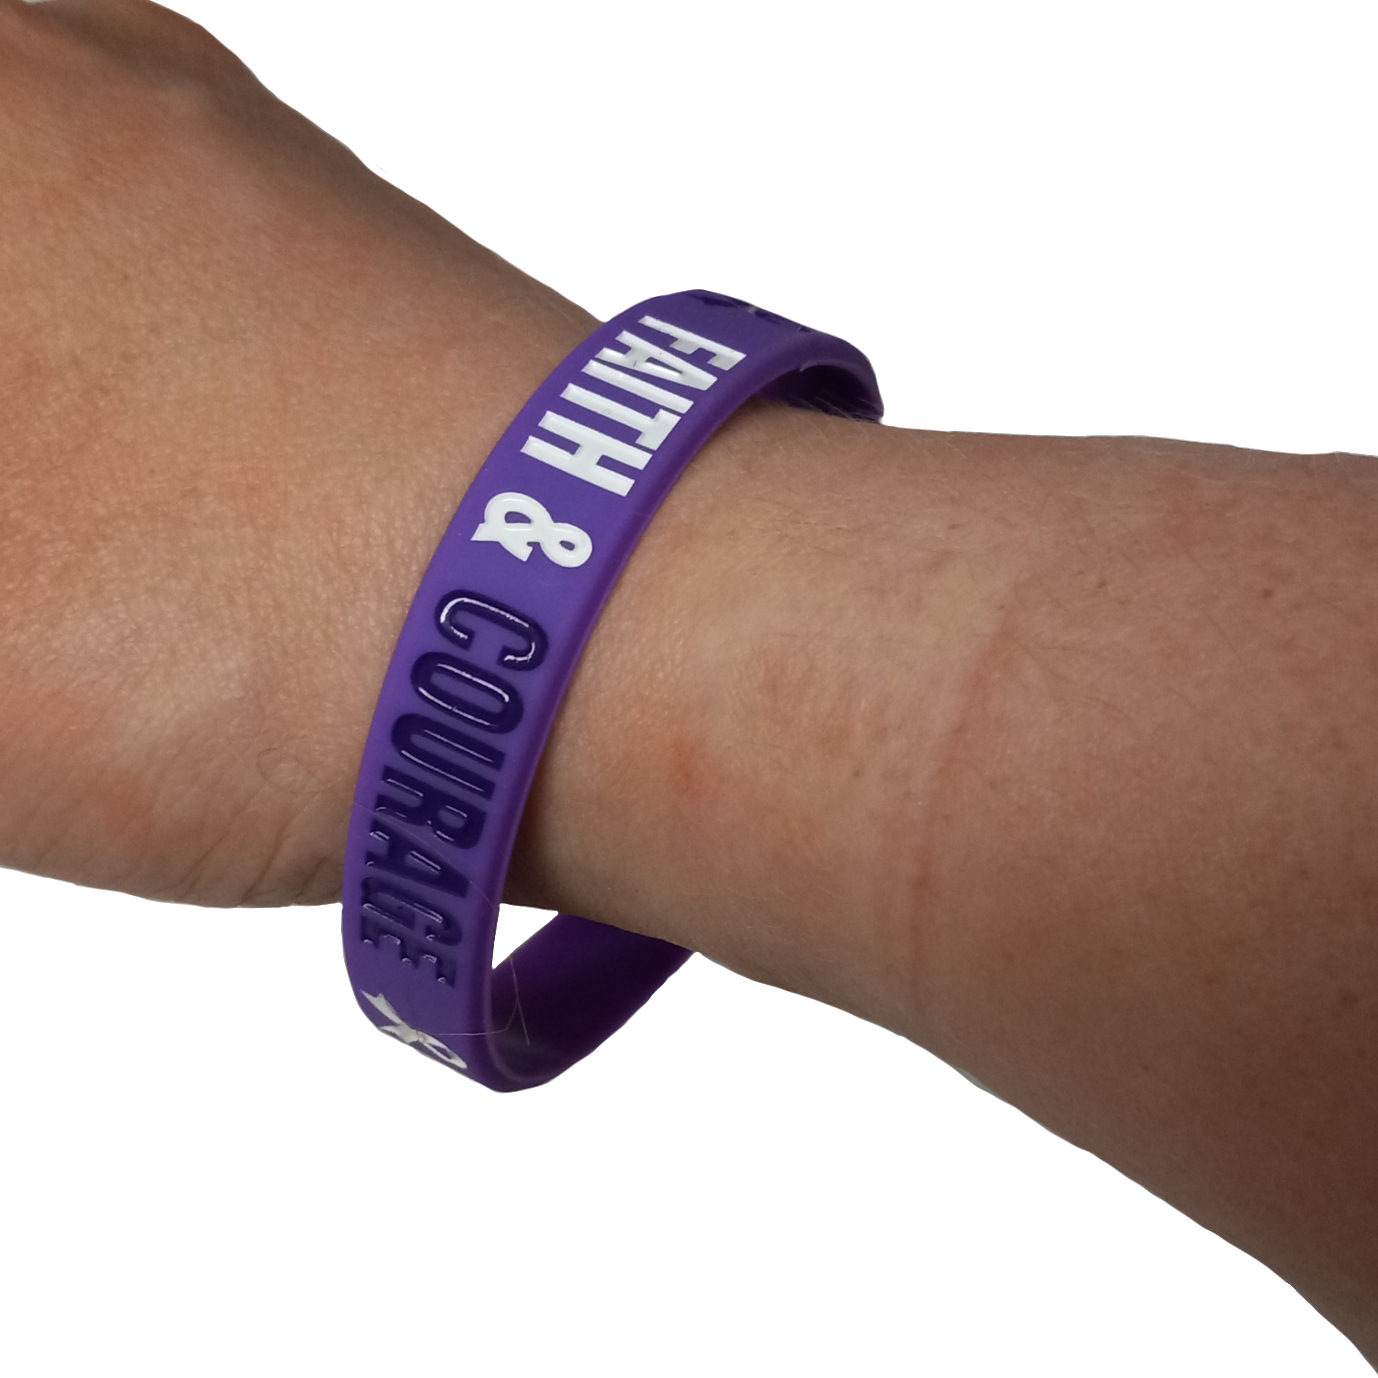 Image of Awareness wristbands being worn